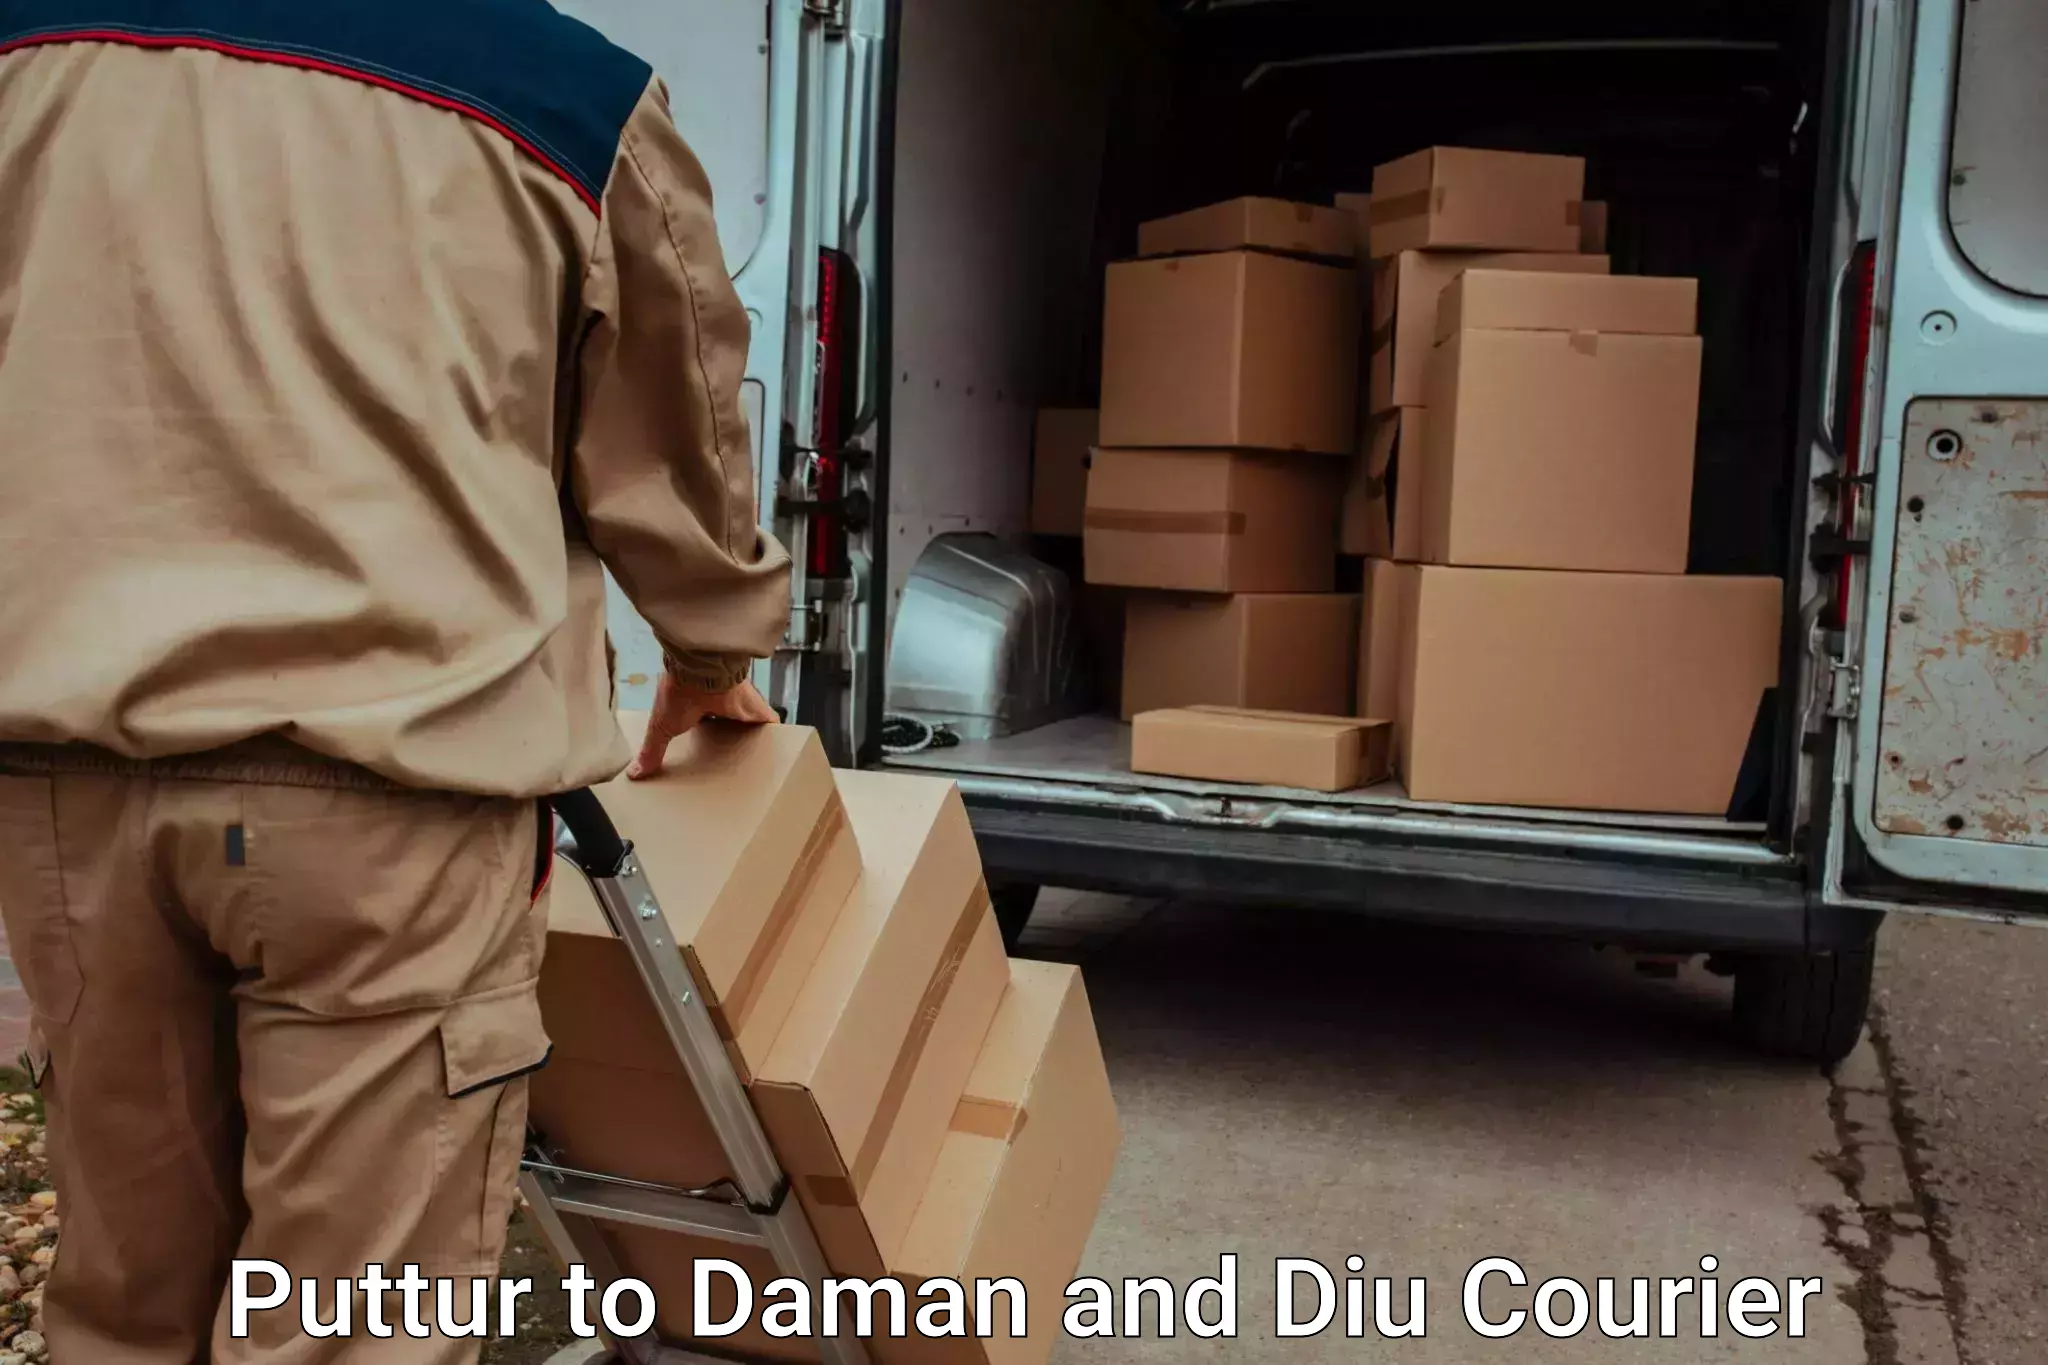 Baggage relocation service Puttur to Daman and Diu